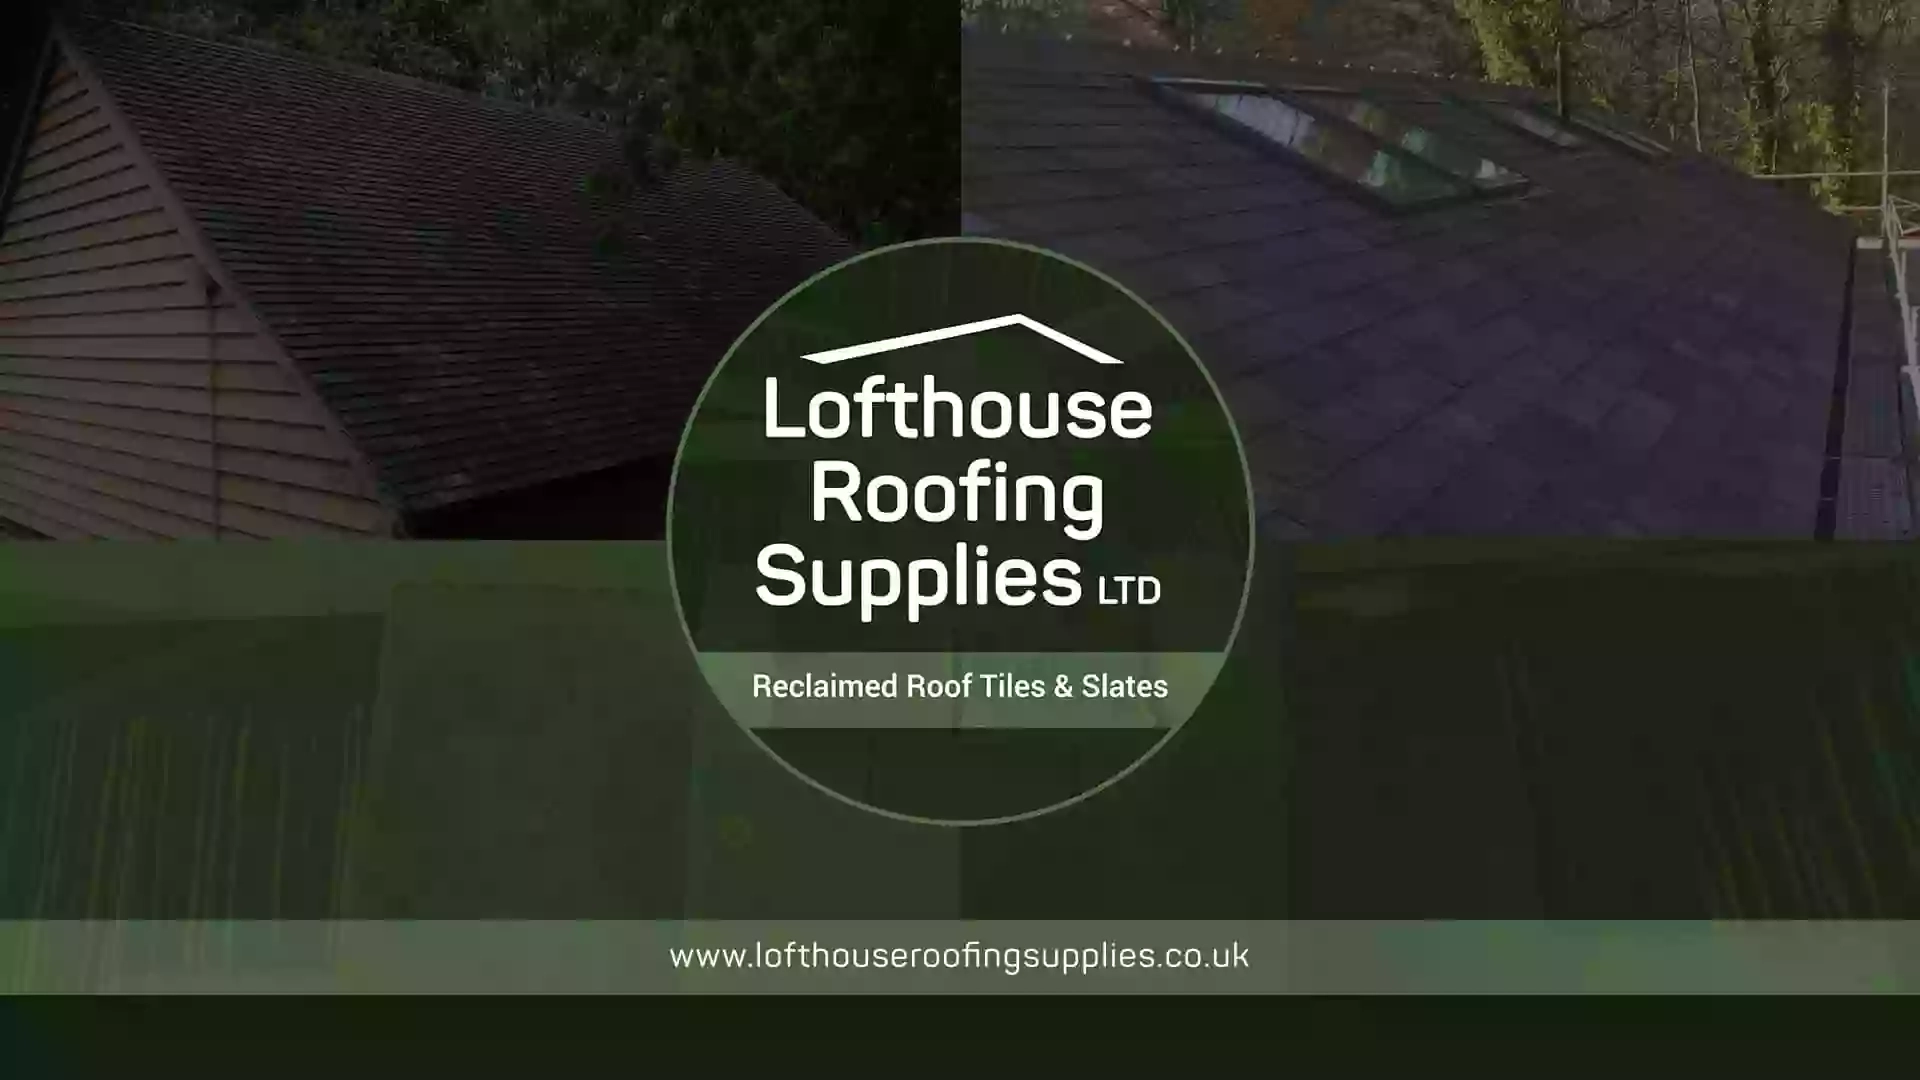 Lofthouse Roofing Supplies Ltd